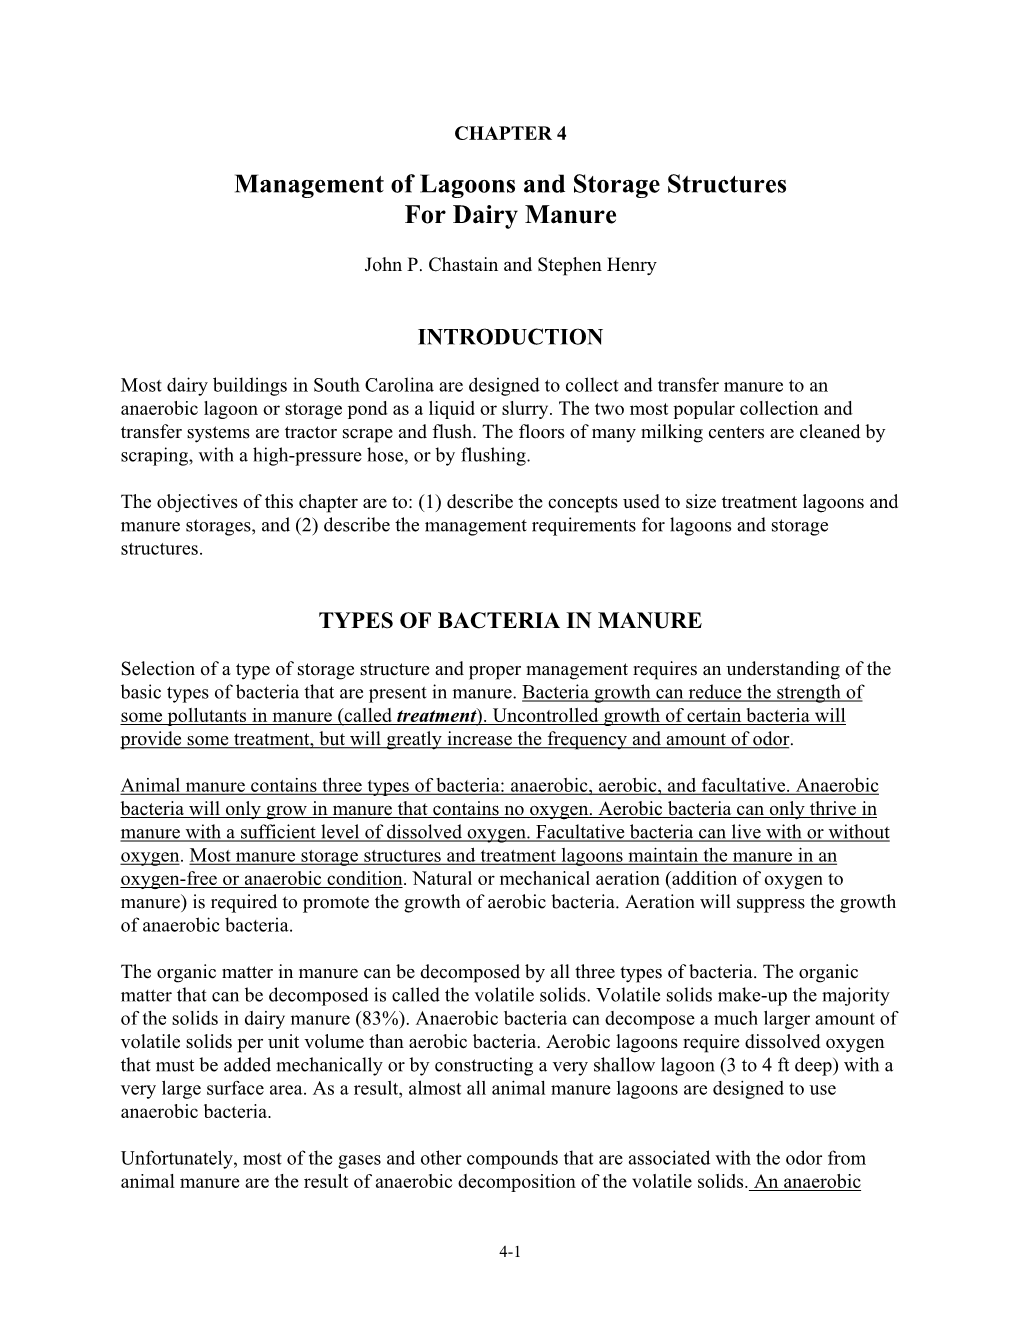 Management of Lagoons and Storage Structures for Dairy Manure